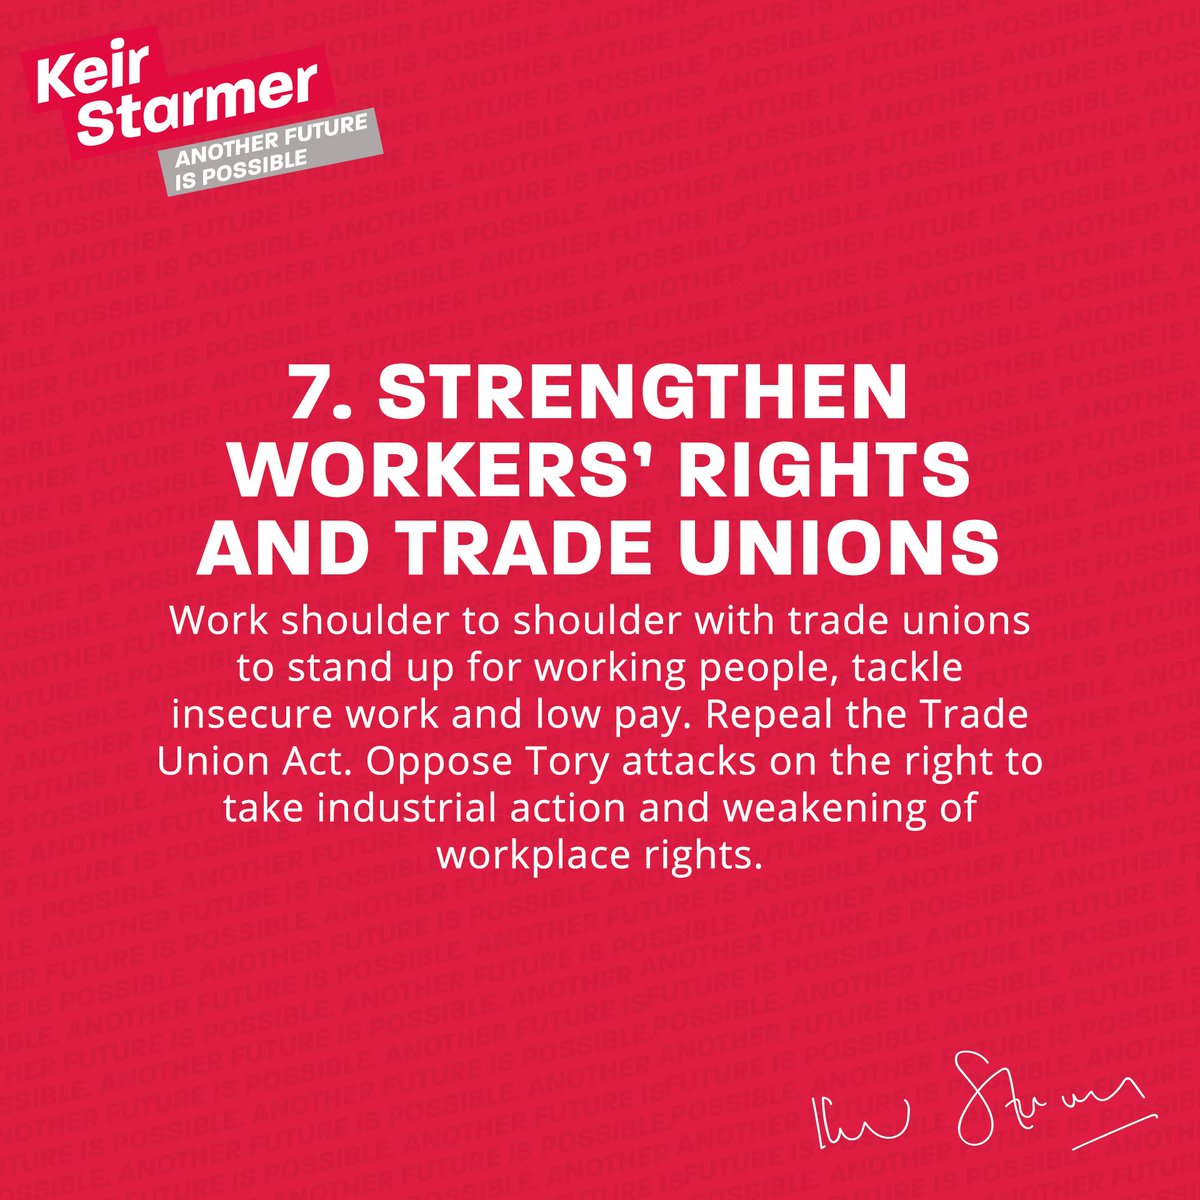 7) Strengthen Workers’ Rights and Trade Unions